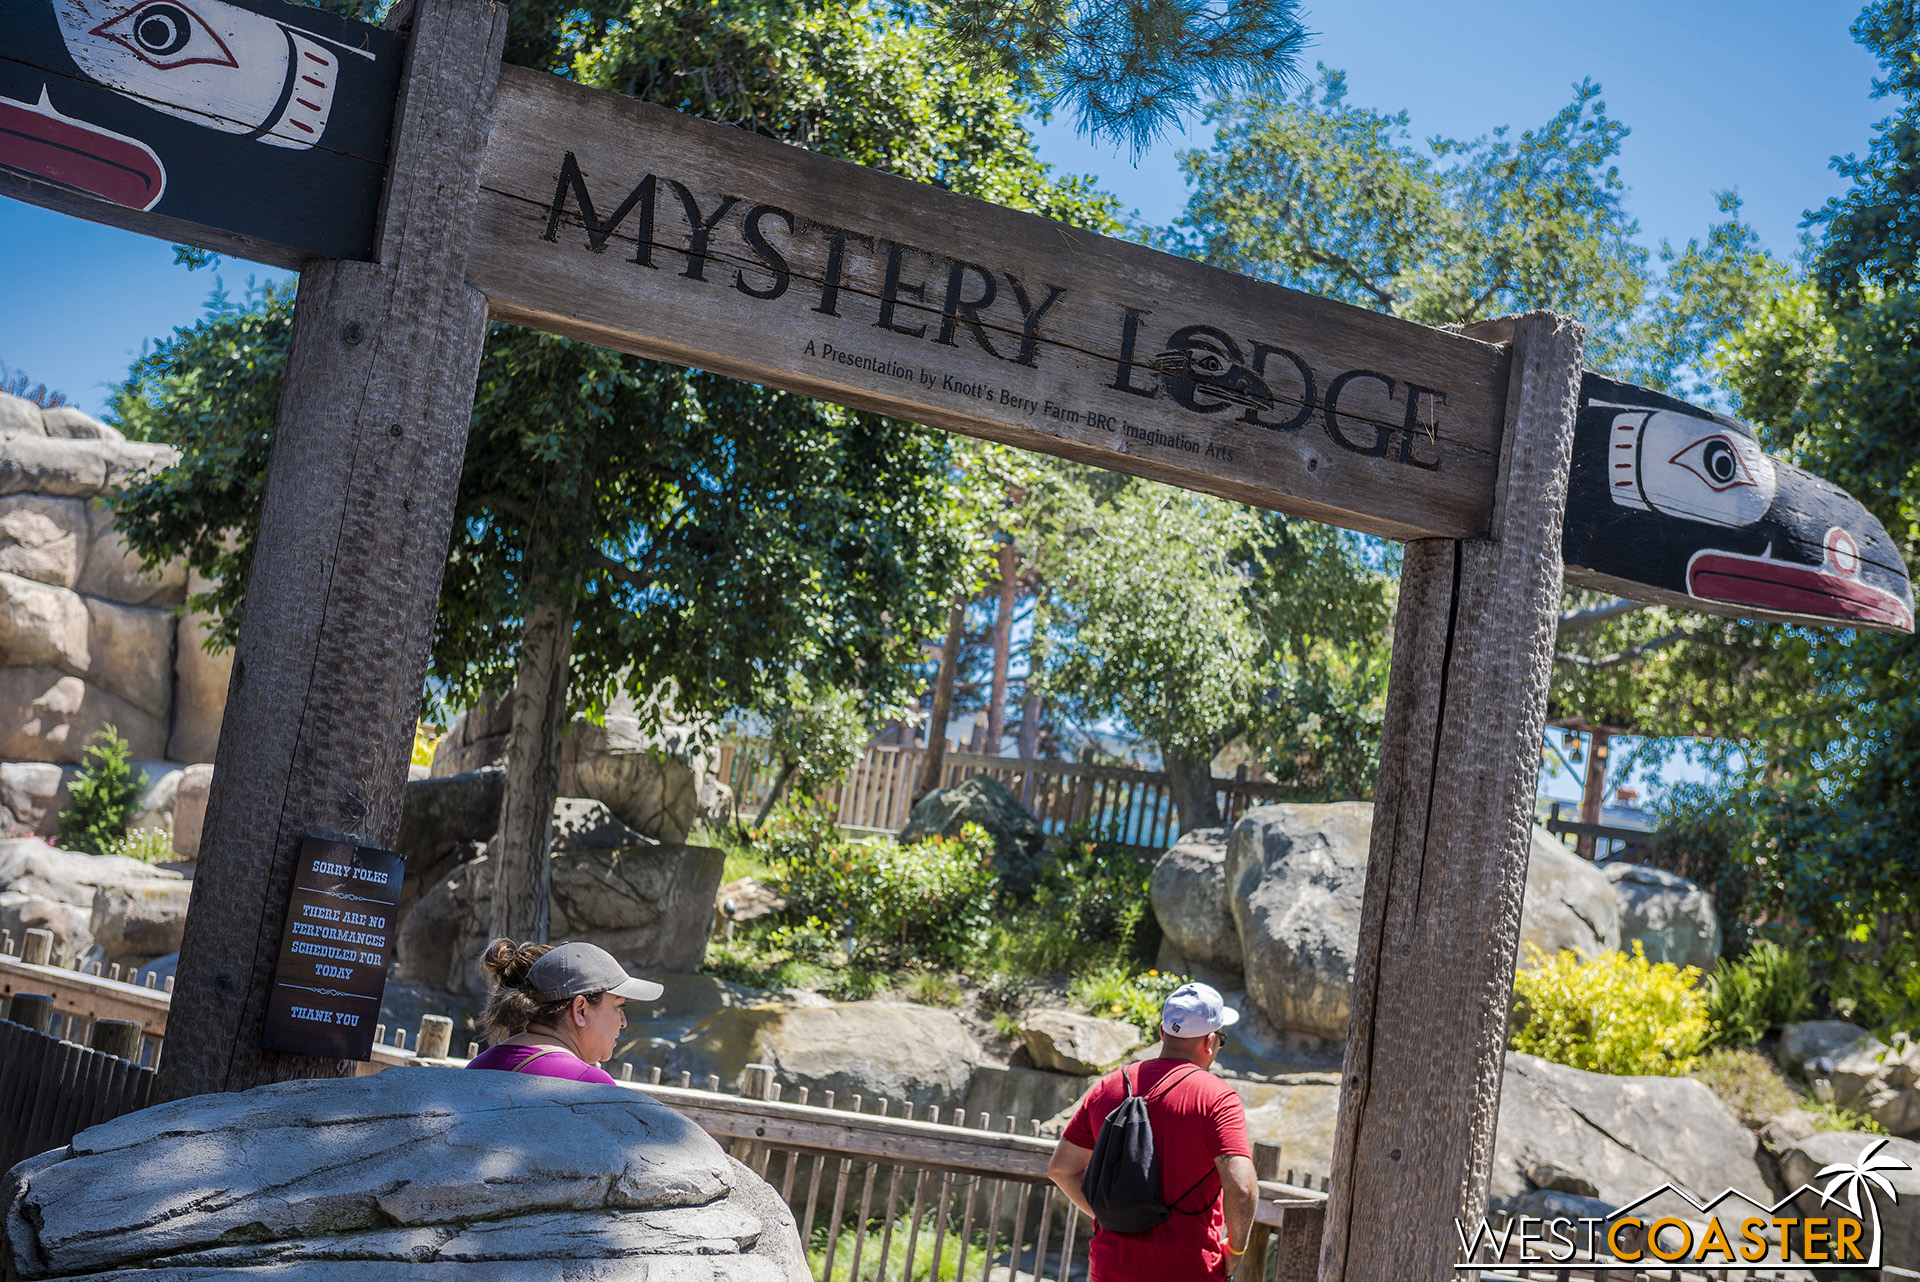  Speaking of mysterious things… Mystery Lodge has been closed indefinitely all summer.  Could it become the site of the new fort that the U.S. Cavalry is looking to build? 